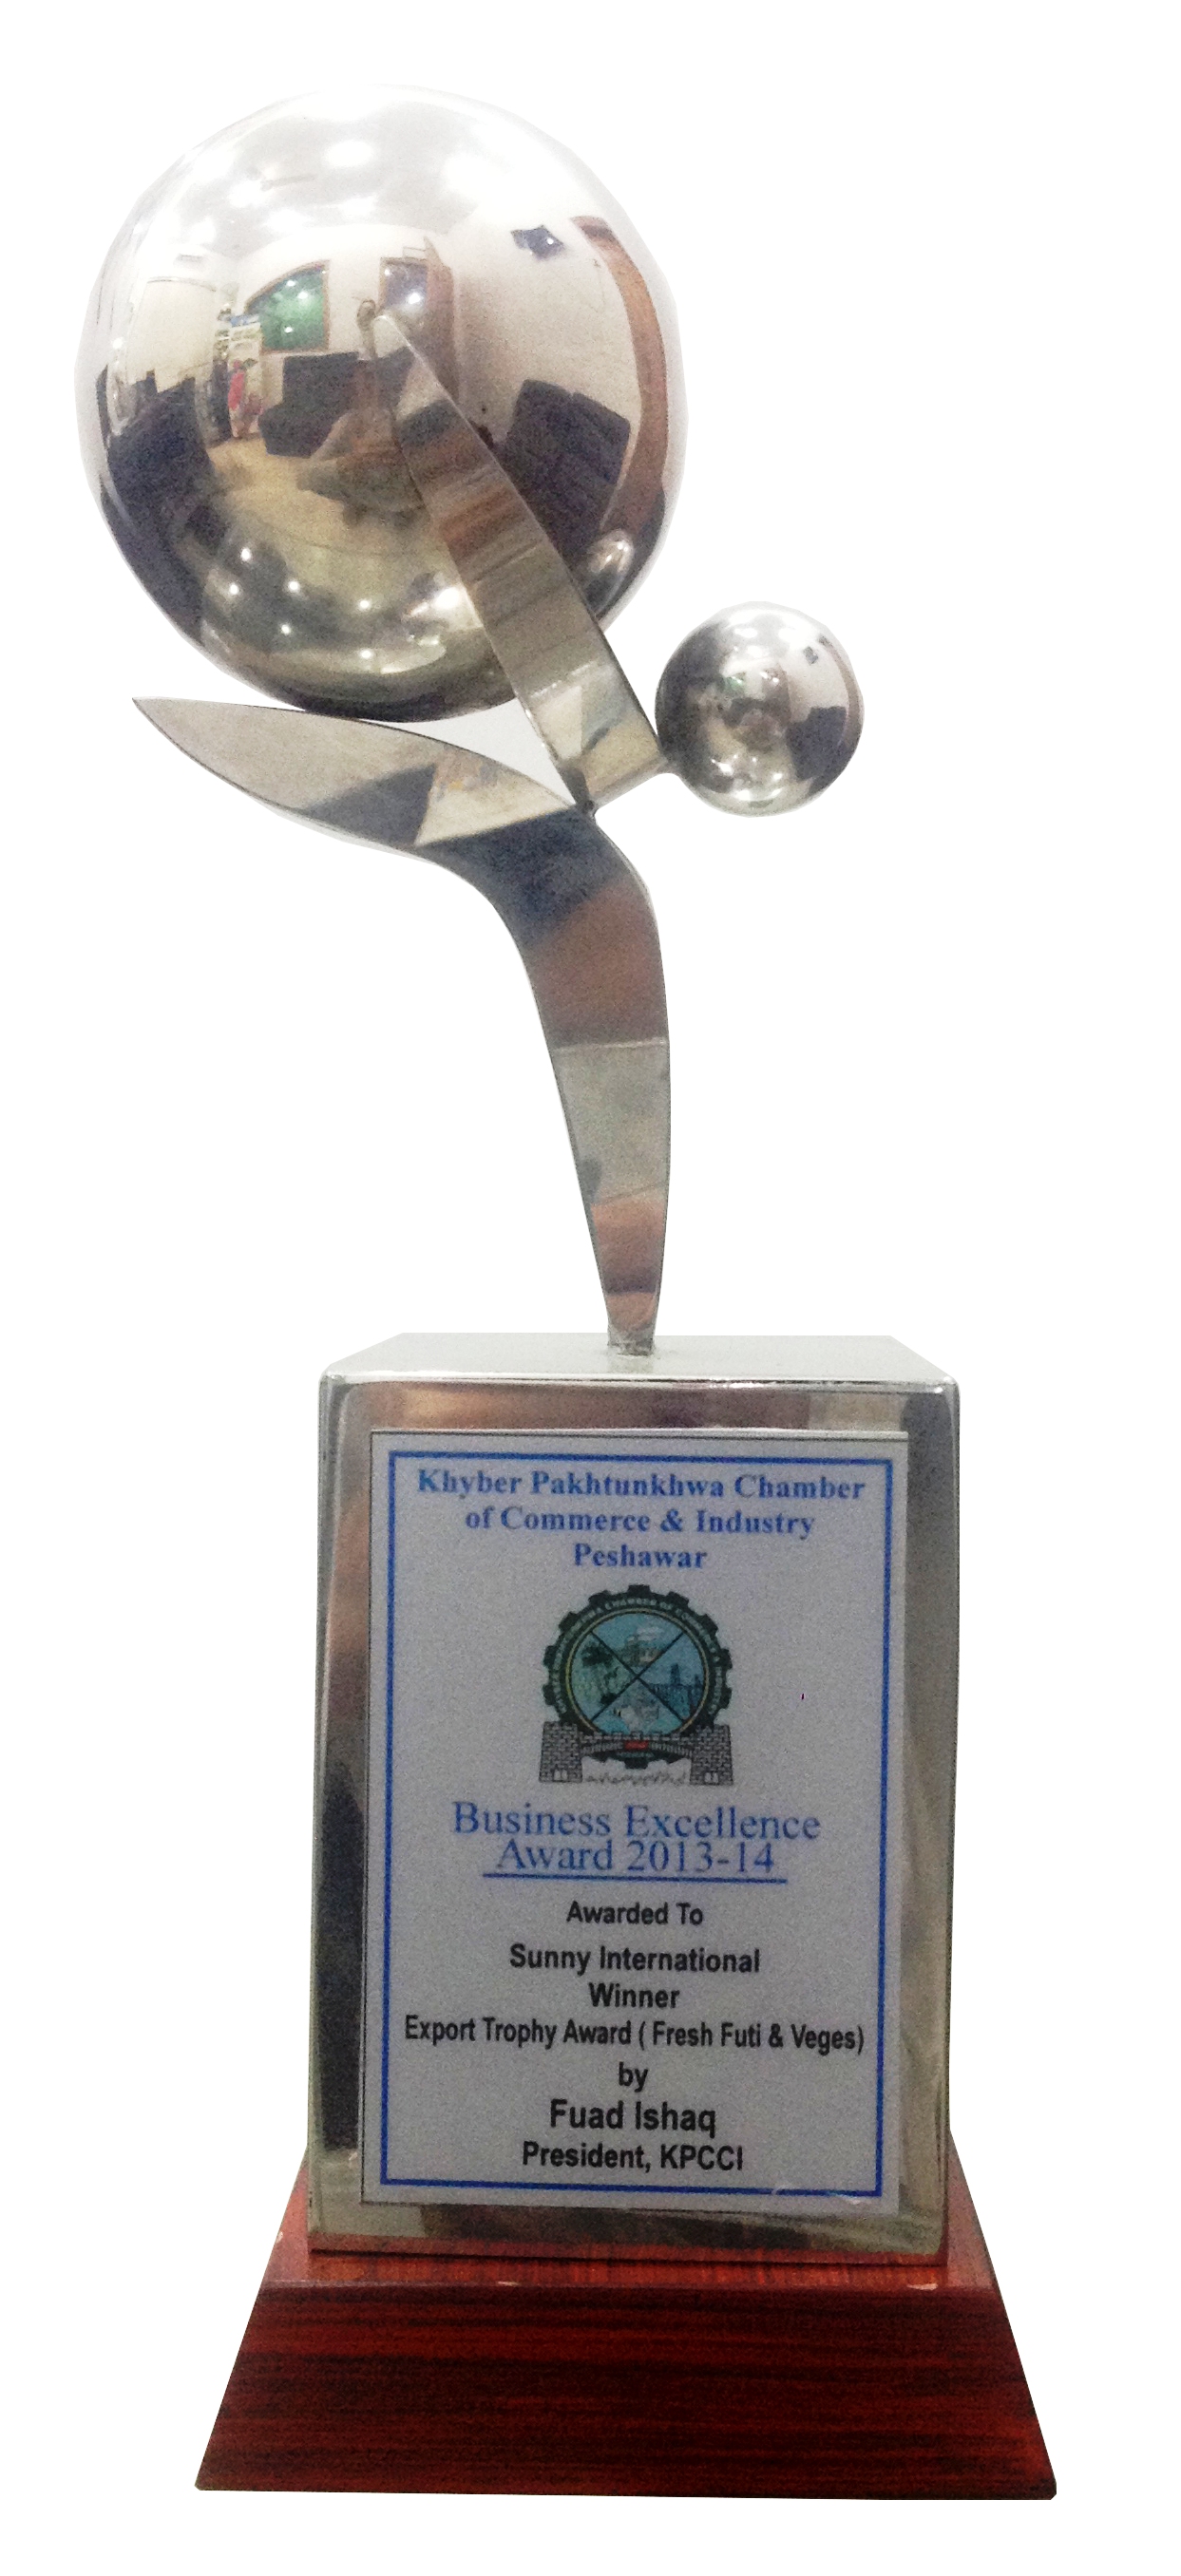 Business Excellence Award 2013-14